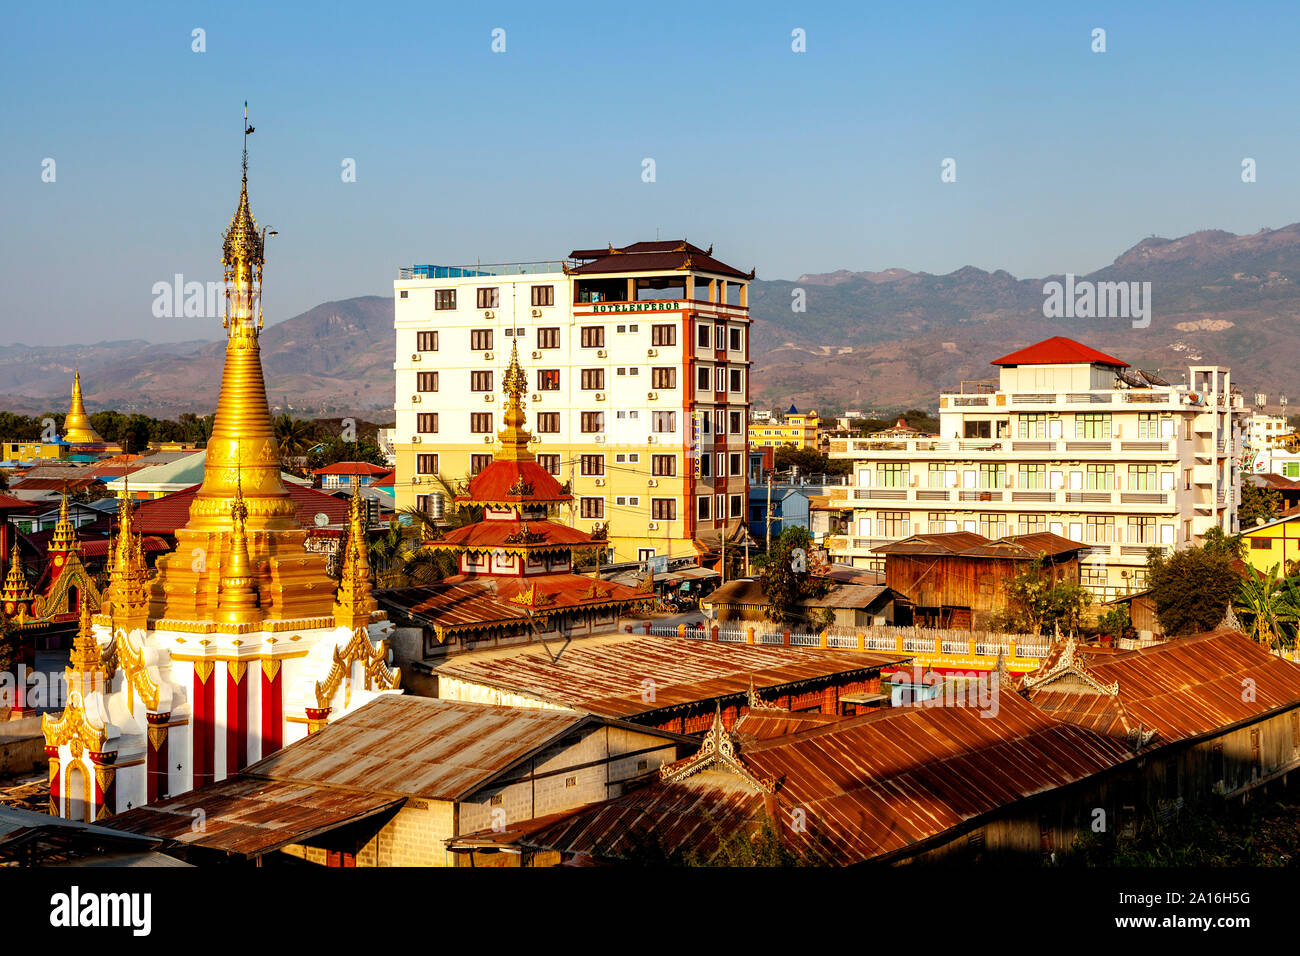 An Elevated View Of The Town Of Nyaung Shwe, Lake Inle, Shan State, Myanmar Stock Photo